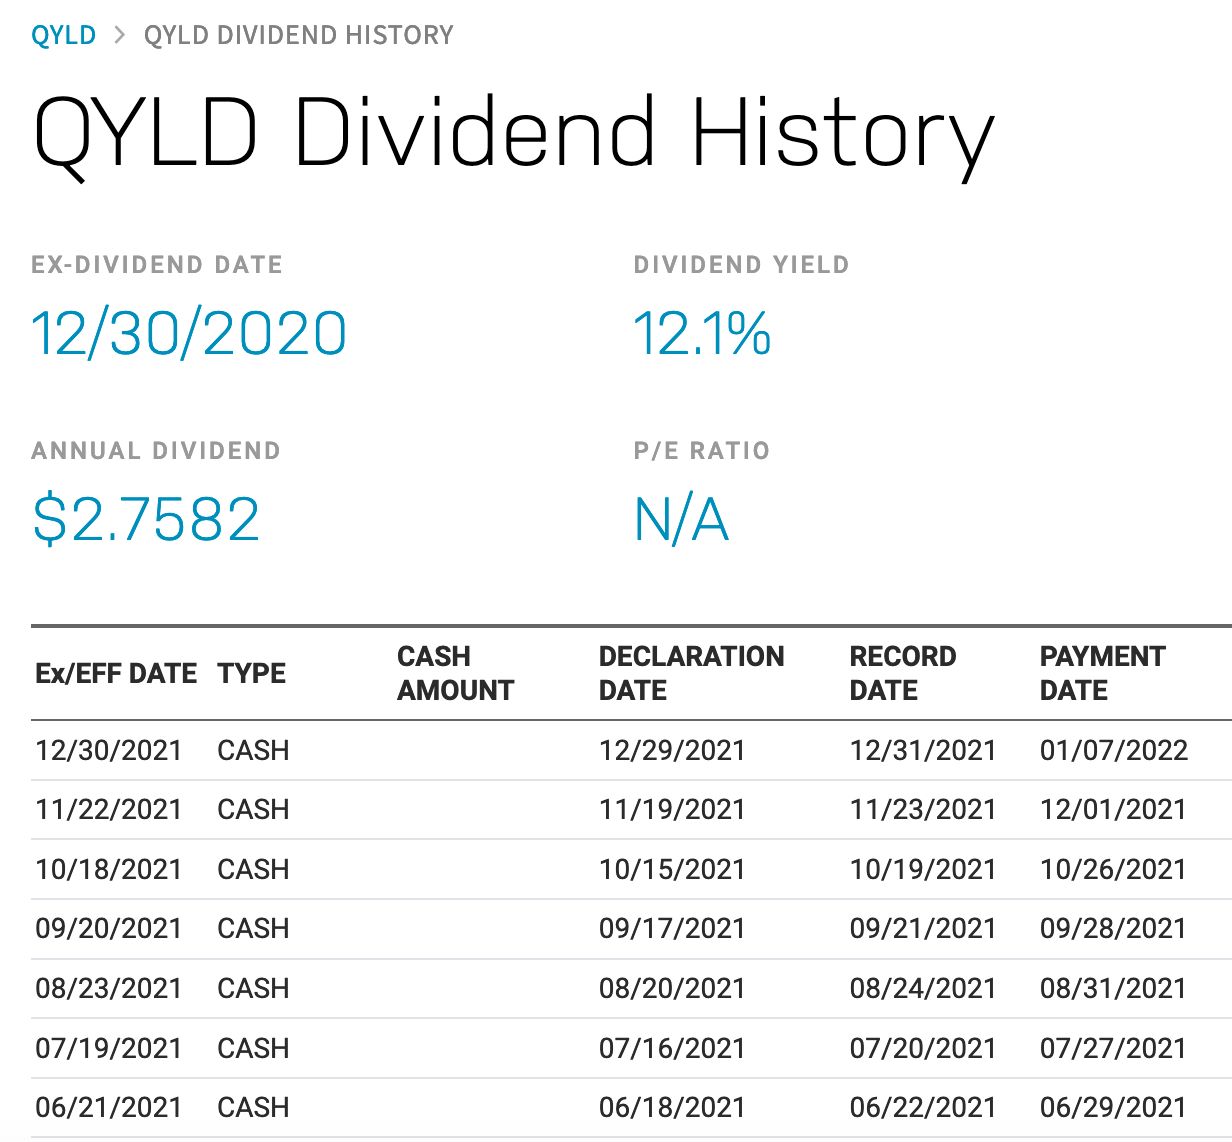 How Much Does QYLD Pay In Dividends?